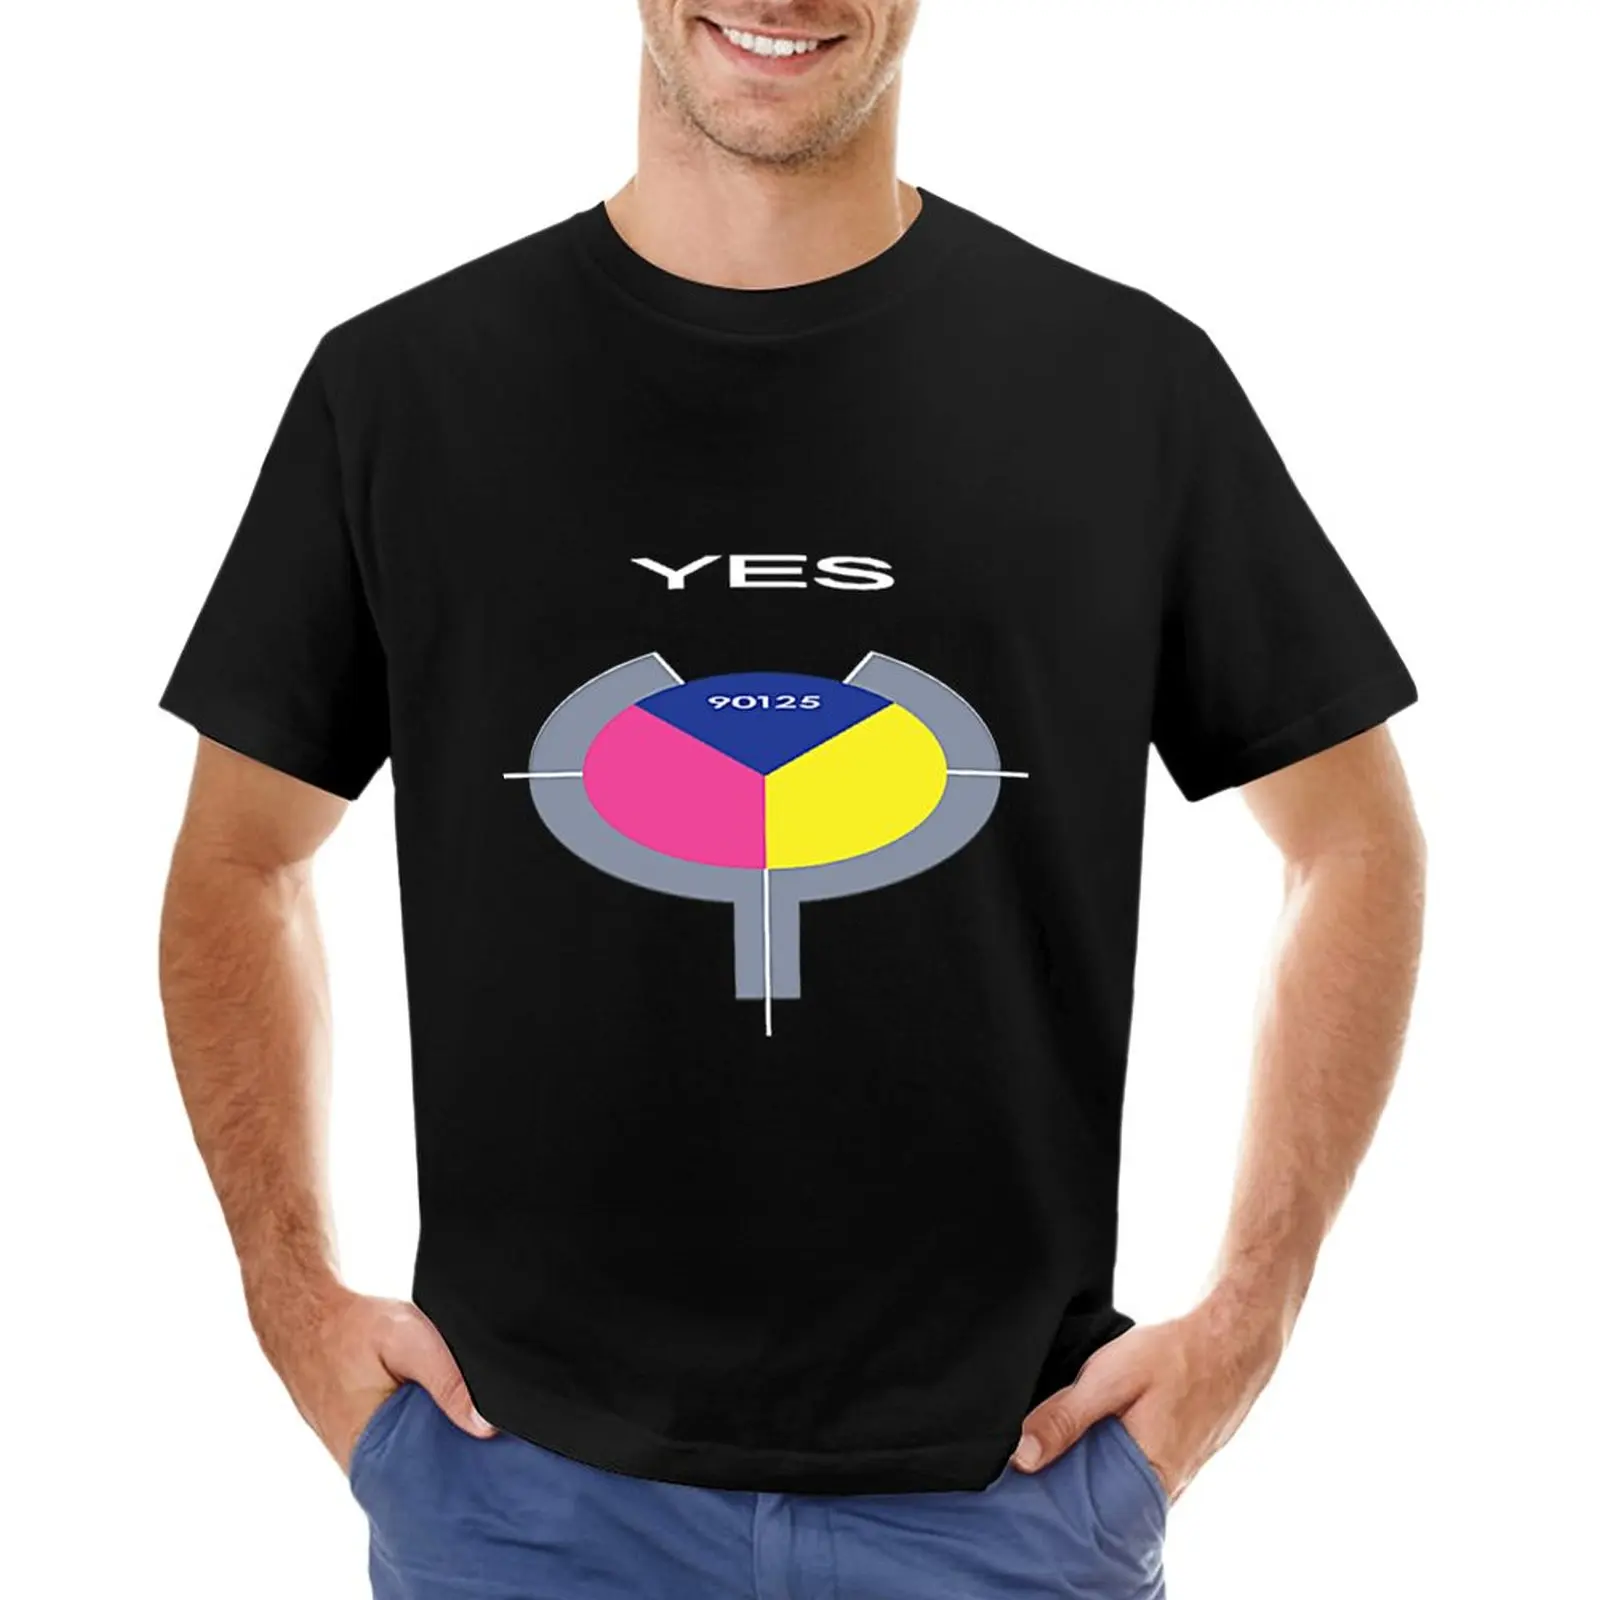 

Yes 90125 T-Shirt custom t shirts design your own shirts graphic tees blank t shirts tshirts for men